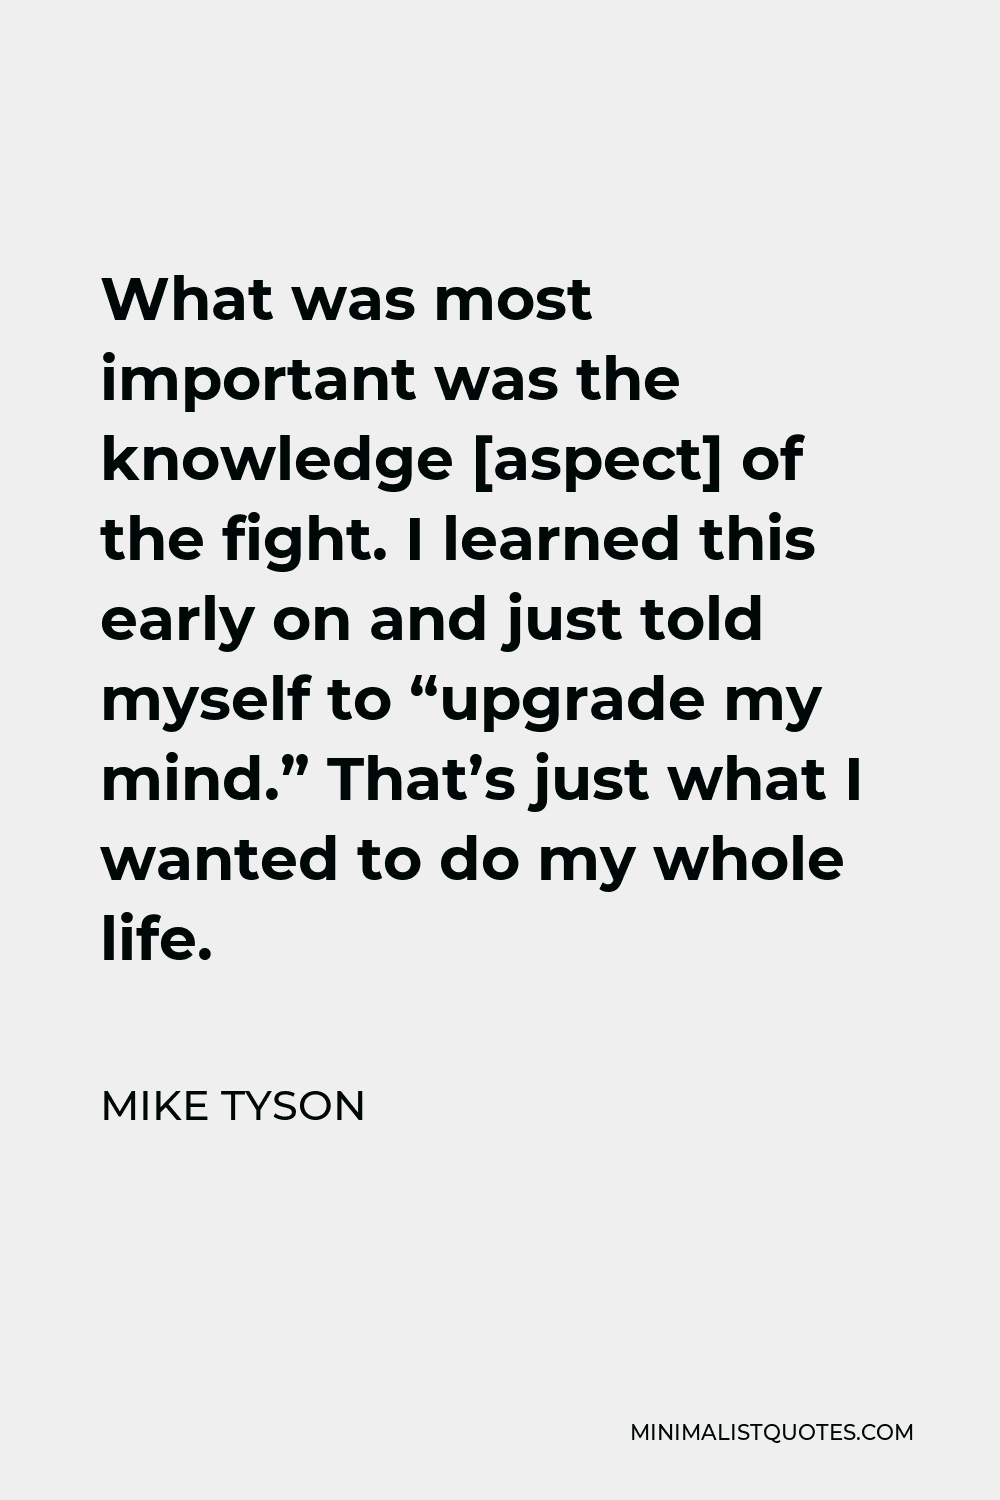 Mike Tyson Quote - What was most important was the knowledge [aspect] of the fight. I learned this early on and just told myself to “upgrade my mind.” That’s just what I wanted to do my whole life.